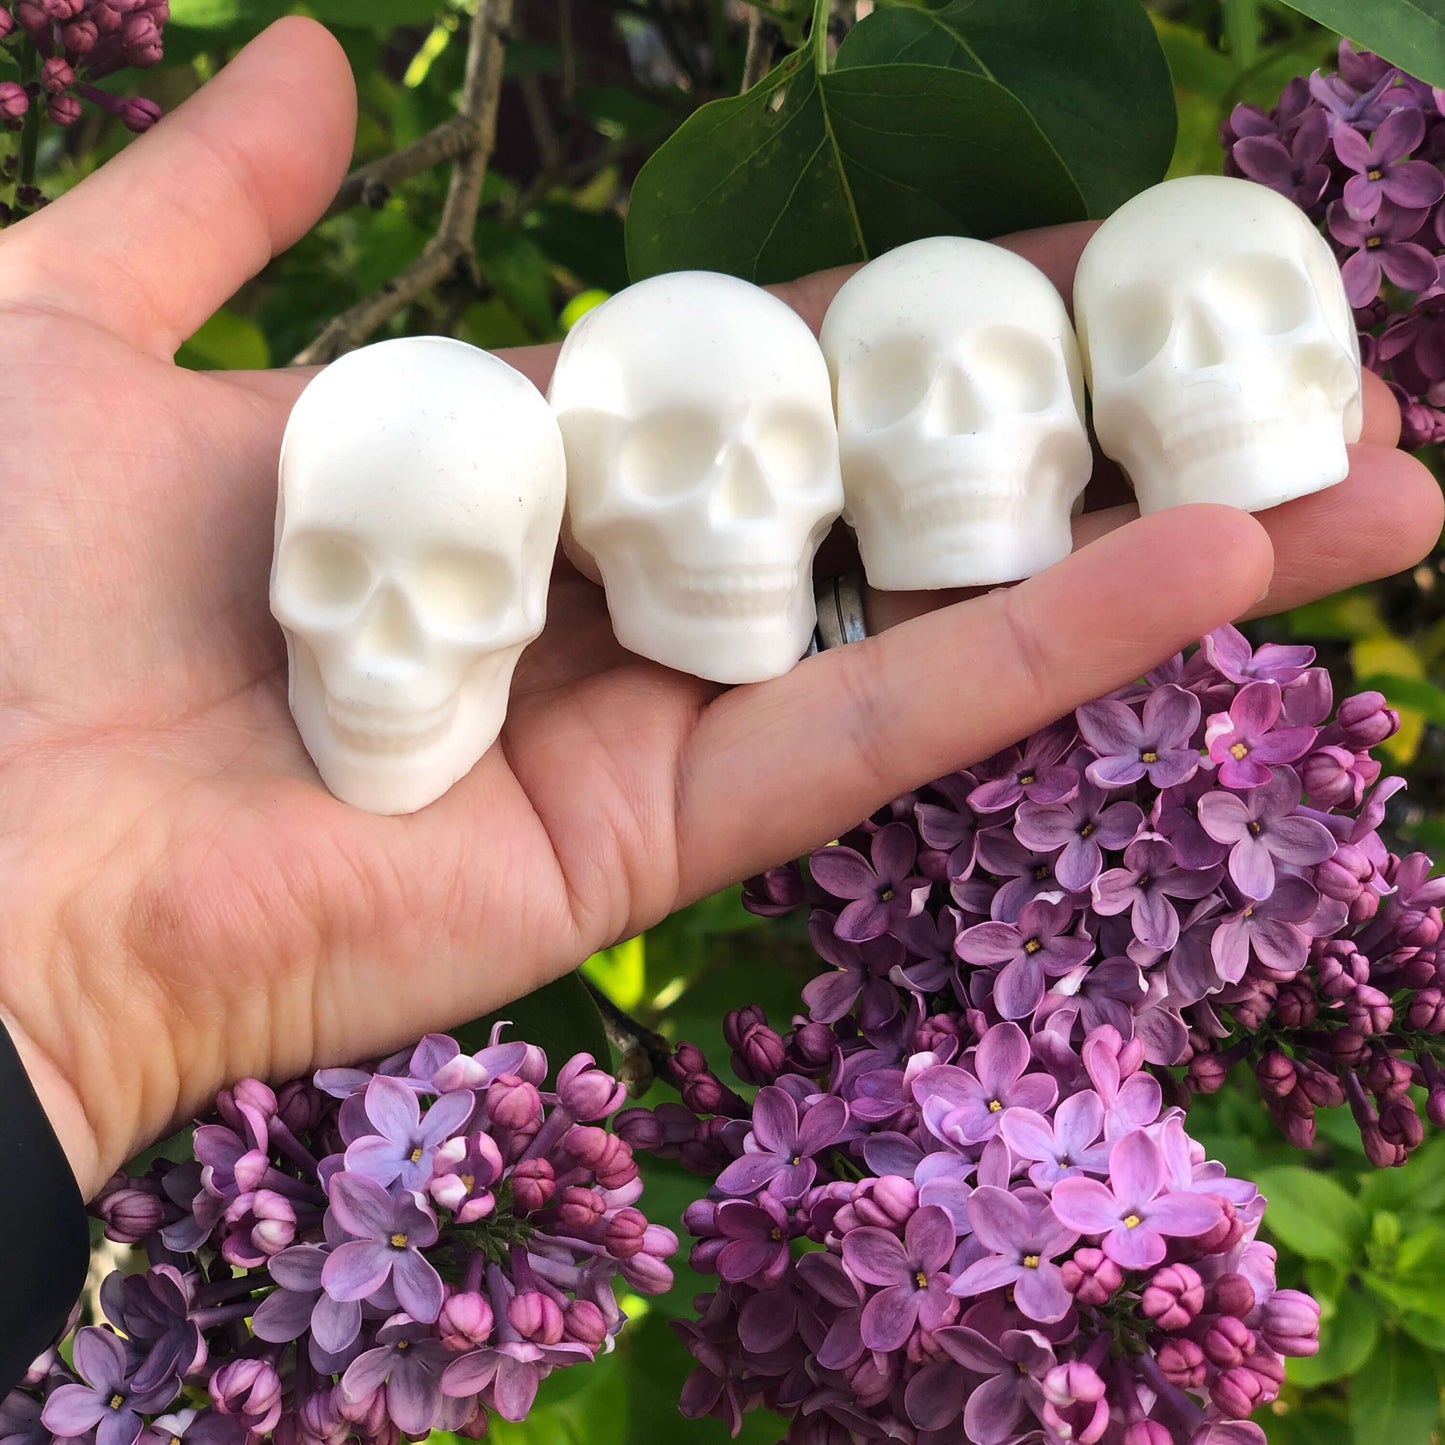 Four mini skull soaps held in a hand with lilac blossoms